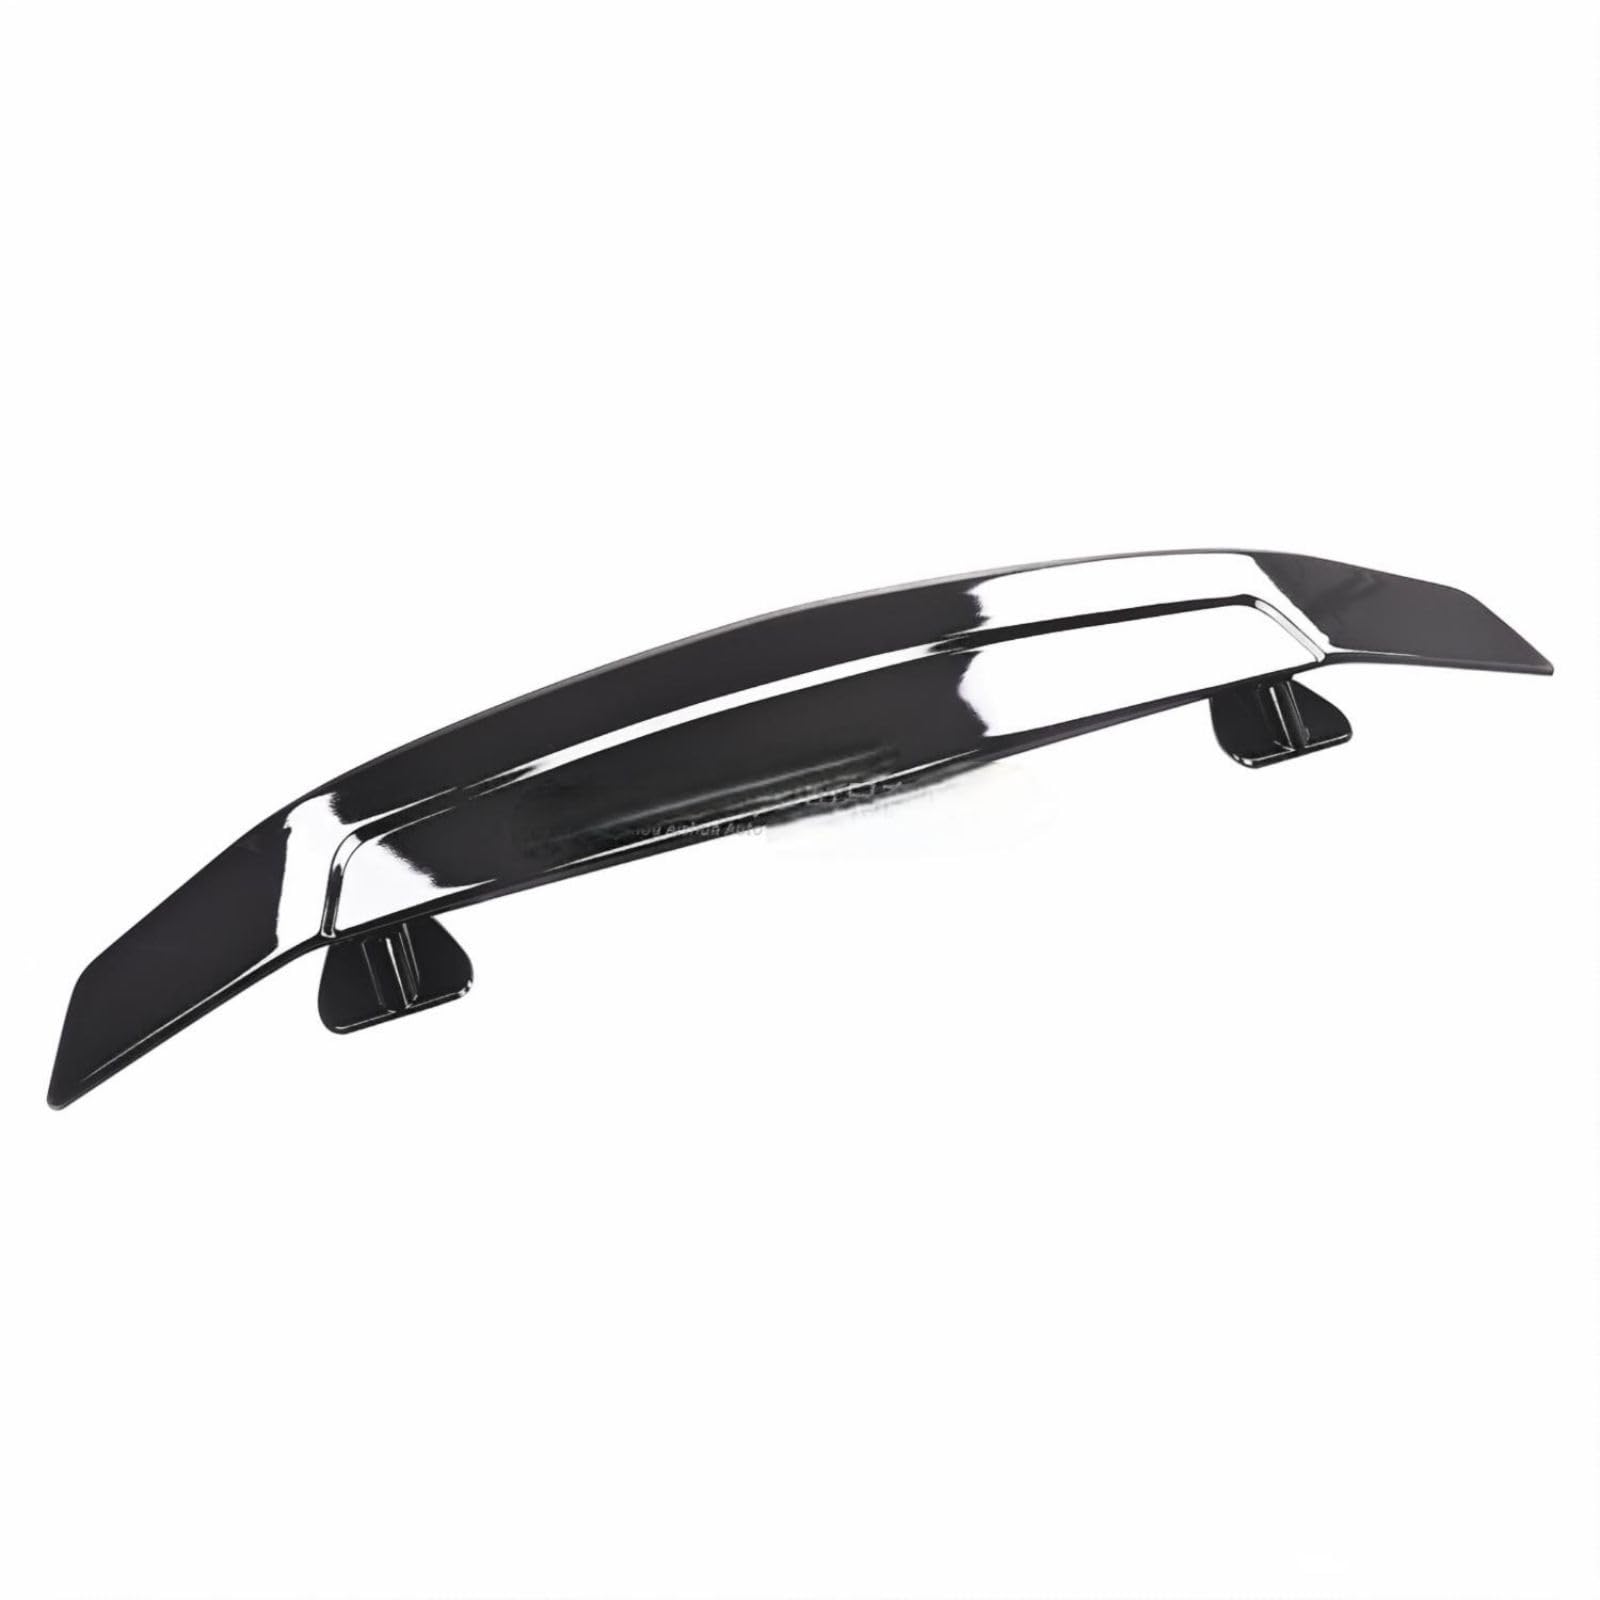 ABS Car Roof Spoiler für Toyota Camry Solara II (facelift 2006) 2006-2008, Boot Rear Spoiler Rear Wing Wing Lip Boot Spoiler Tuning Accessories,Bright Black von FFSWQAZ4A1